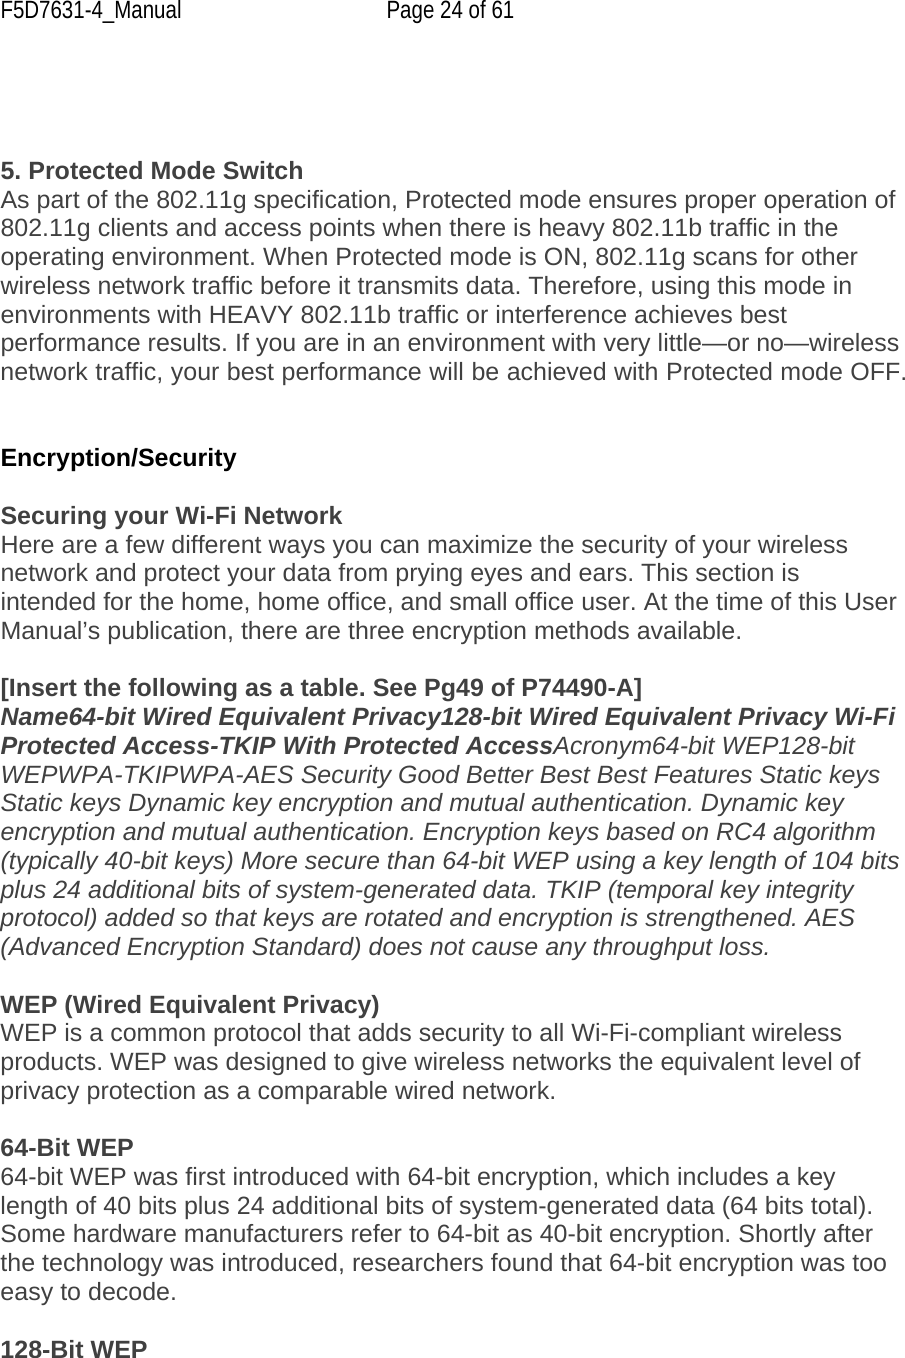 F5D7631-4_Manual  Page 24 of 61     5. Protected Mode Switch As part of the 802.11g specification, Protected mode ensures proper operation of 802.11g clients and access points when there is heavy 802.11b traffic in the operating environment. When Protected mode is ON, 802.11g scans for other wireless network traffic before it transmits data. Therefore, using this mode in environments with HEAVY 802.11b traffic or interference achieves best performance results. If you are in an environment with very little—or no—wireless network traffic, your best performance will be achieved with Protected mode OFF.   Encryption/Security  Securing your Wi-Fi Network Here are a few different ways you can maximize the security of your wireless network and protect your data from prying eyes and ears. This section is intended for the home, home office, and small office user. At the time of this User Manual’s publication, there are three encryption methods available.  [Insert the following as a table. See Pg49 of P74490-A] Name64-bit Wired Equivalent Privacy128-bit Wired Equivalent Privacy Wi-Fi Protected Access-TKIP With Protected AccessAcronym64-bit WEP128-bit WEPWPA-TKIPWPA-AES Security Good Better Best Best Features Static keys Static keys Dynamic key encryption and mutual authentication. Dynamic key encryption and mutual authentication. Encryption keys based on RC4 algorithm (typically 40-bit keys) More secure than 64-bit WEP using a key length of 104 bits plus 24 additional bits of system-generated data. TKIP (temporal key integrity protocol) added so that keys are rotated and encryption is strengthened. AES (Advanced Encryption Standard) does not cause any throughput loss.  WEP (Wired Equivalent Privacy) WEP is a common protocol that adds security to all Wi-Fi-compliant wireless products. WEP was designed to give wireless networks the equivalent level of privacy protection as a comparable wired network.   64-Bit WEP 64-bit WEP was first introduced with 64-bit encryption, which includes a key length of 40 bits plus 24 additional bits of system-generated data (64 bits total). Some hardware manufacturers refer to 64-bit as 40-bit encryption. Shortly after the technology was introduced, researchers found that 64-bit encryption was too easy to decode.  128-Bit WEP 